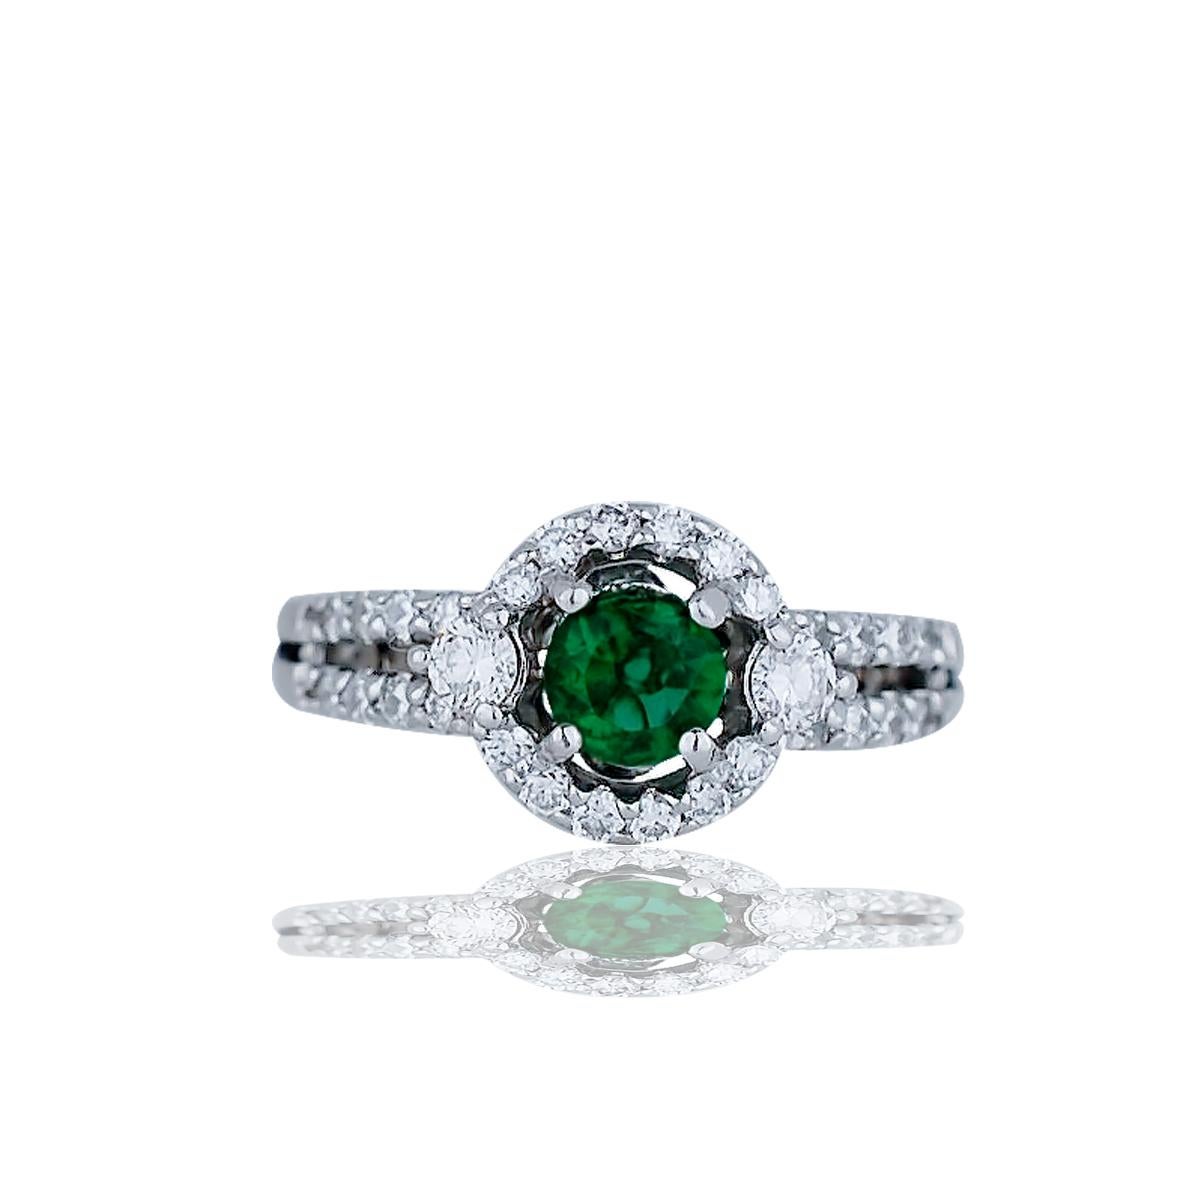 Contemporary Chatham Emerald Set with Diamonds in Halo Diamond Ring, 1.25 Carat For Sale